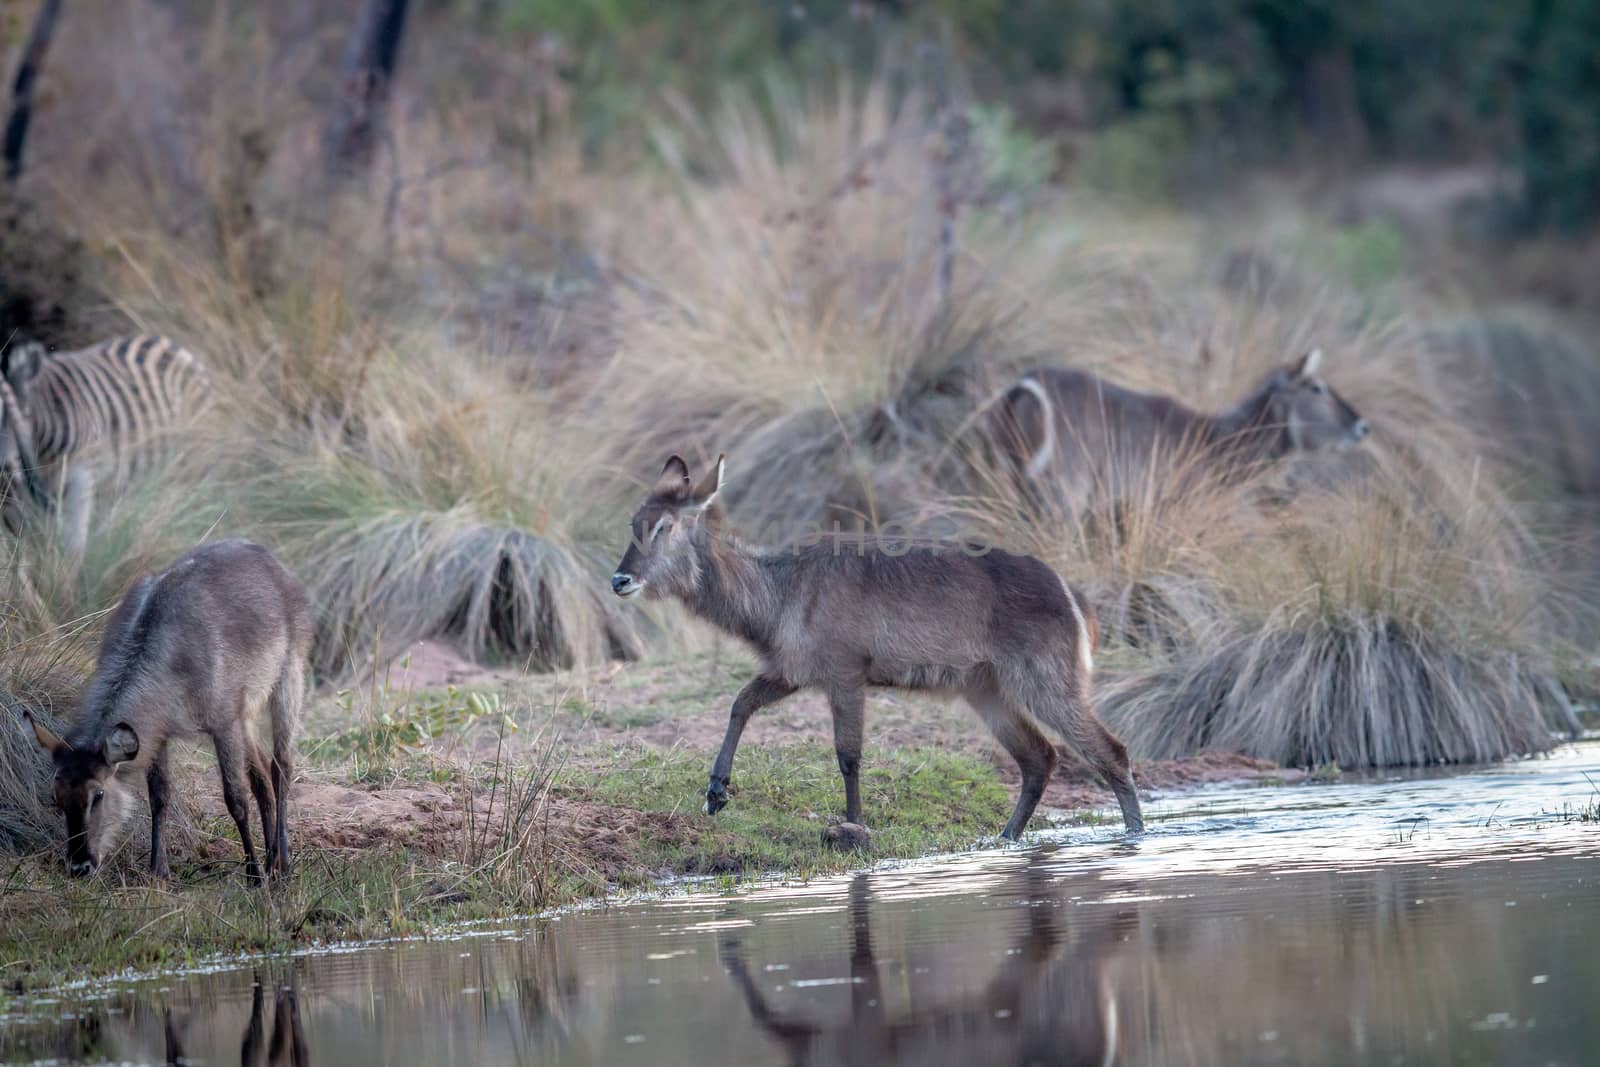 Waterbuck crossing a small river. by Simoneemanphotography